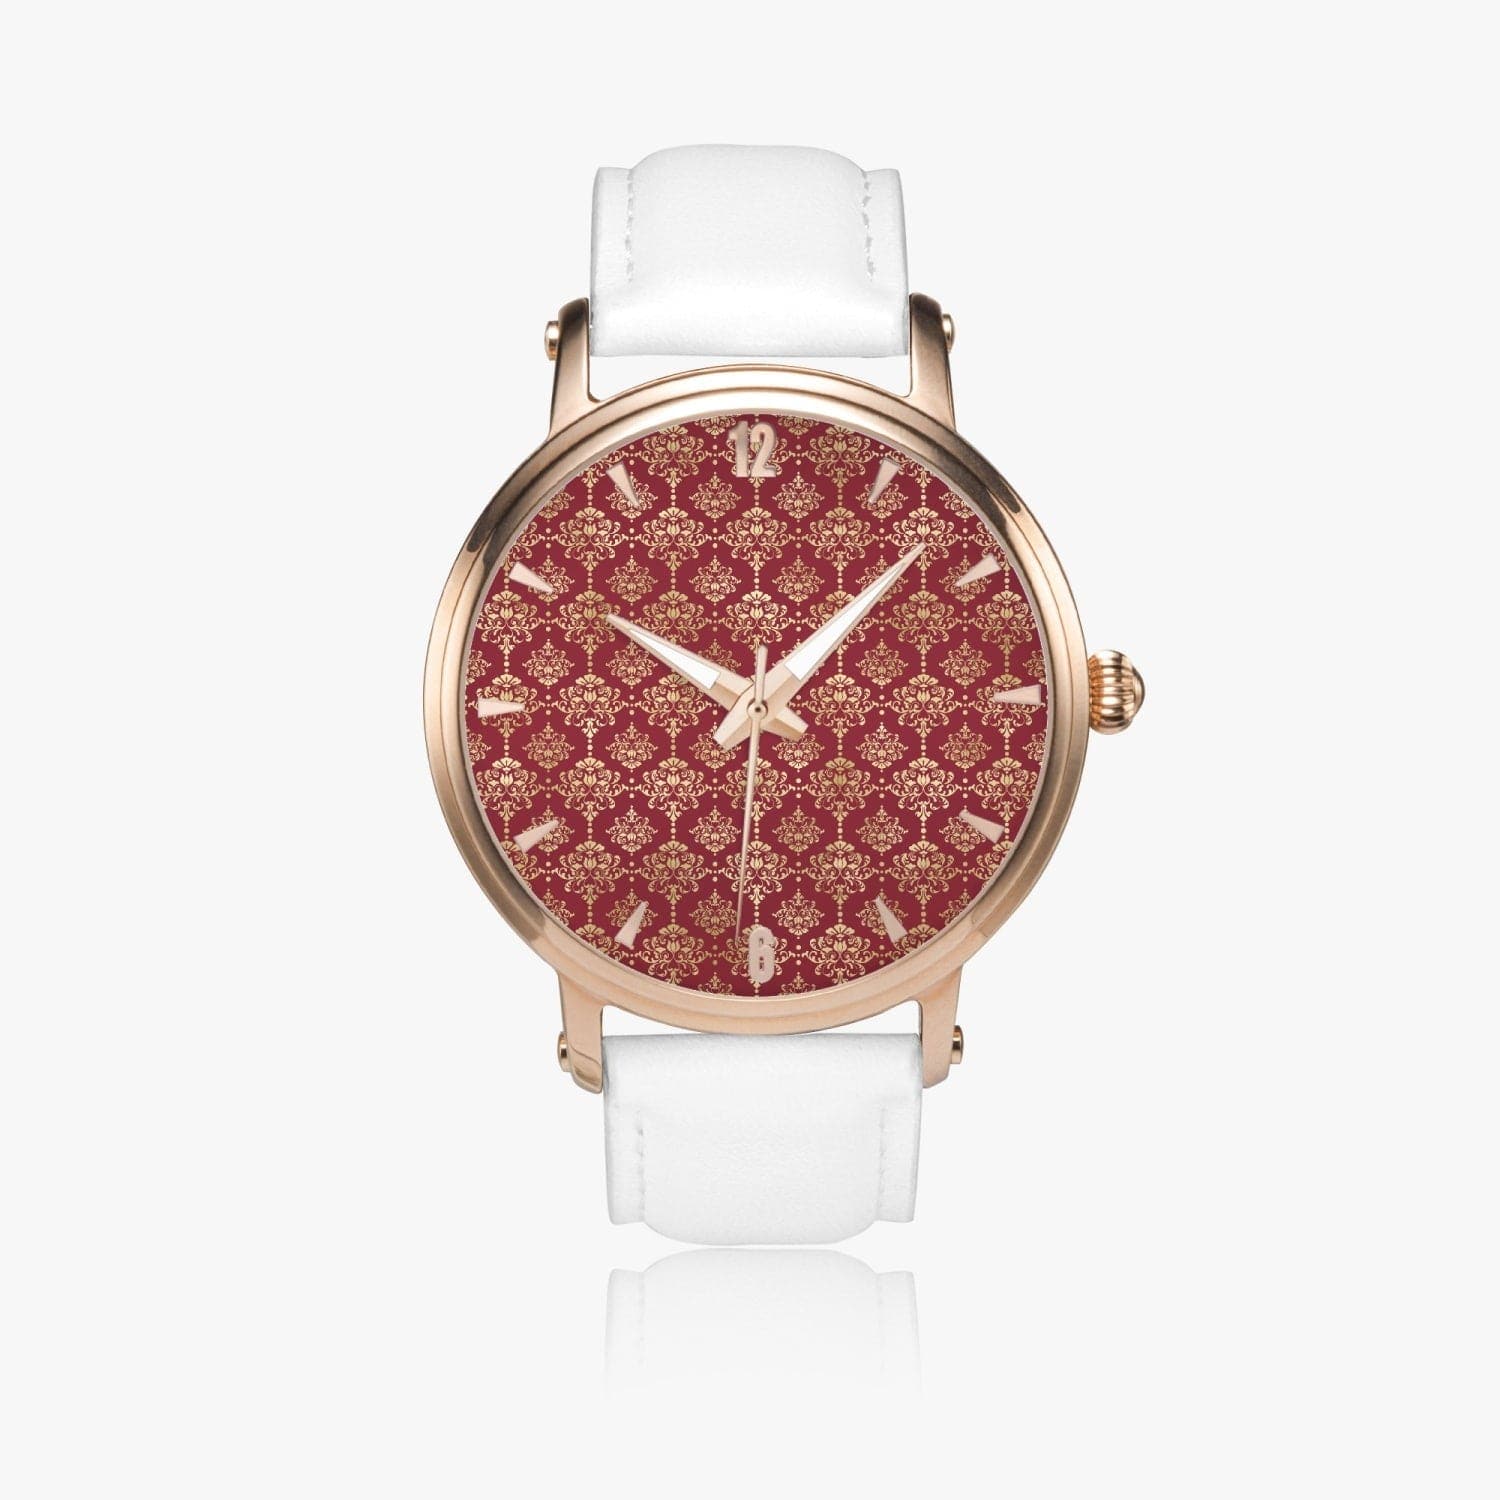 Rose and Gold Damask Patterned Collection V - 46mm Unisex Automatic Watch (Rose Gold) by Sensus Studio Design